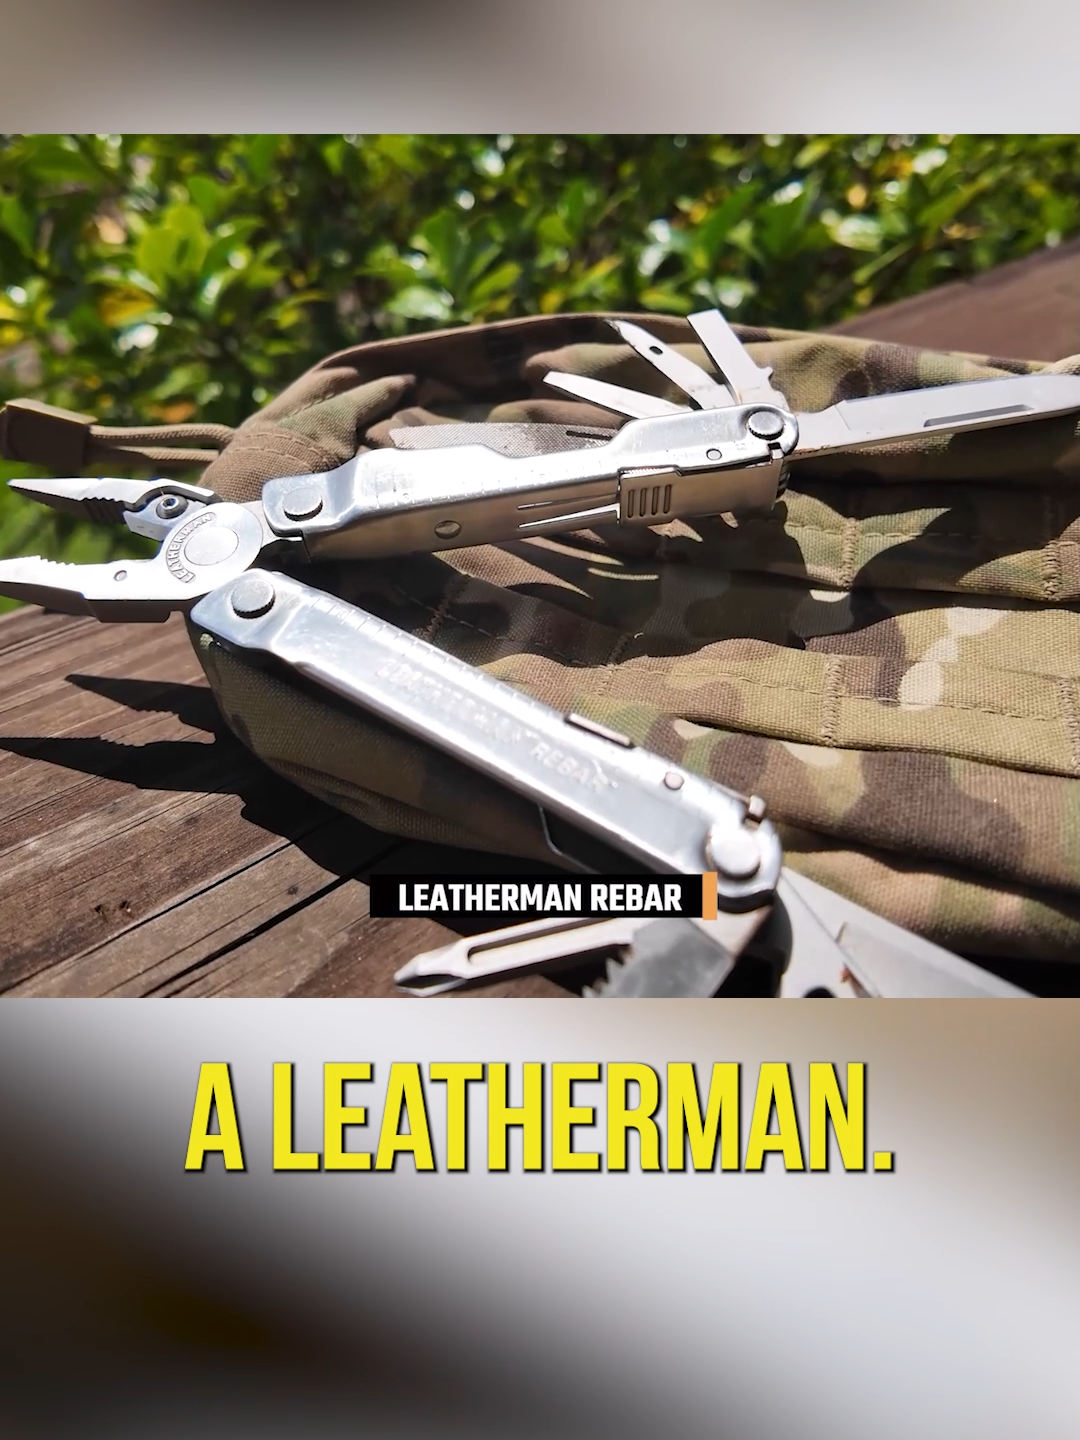 The Essential Tool I Carried Through Basic Training: Leatherman  #army #military #leatherman #foryou